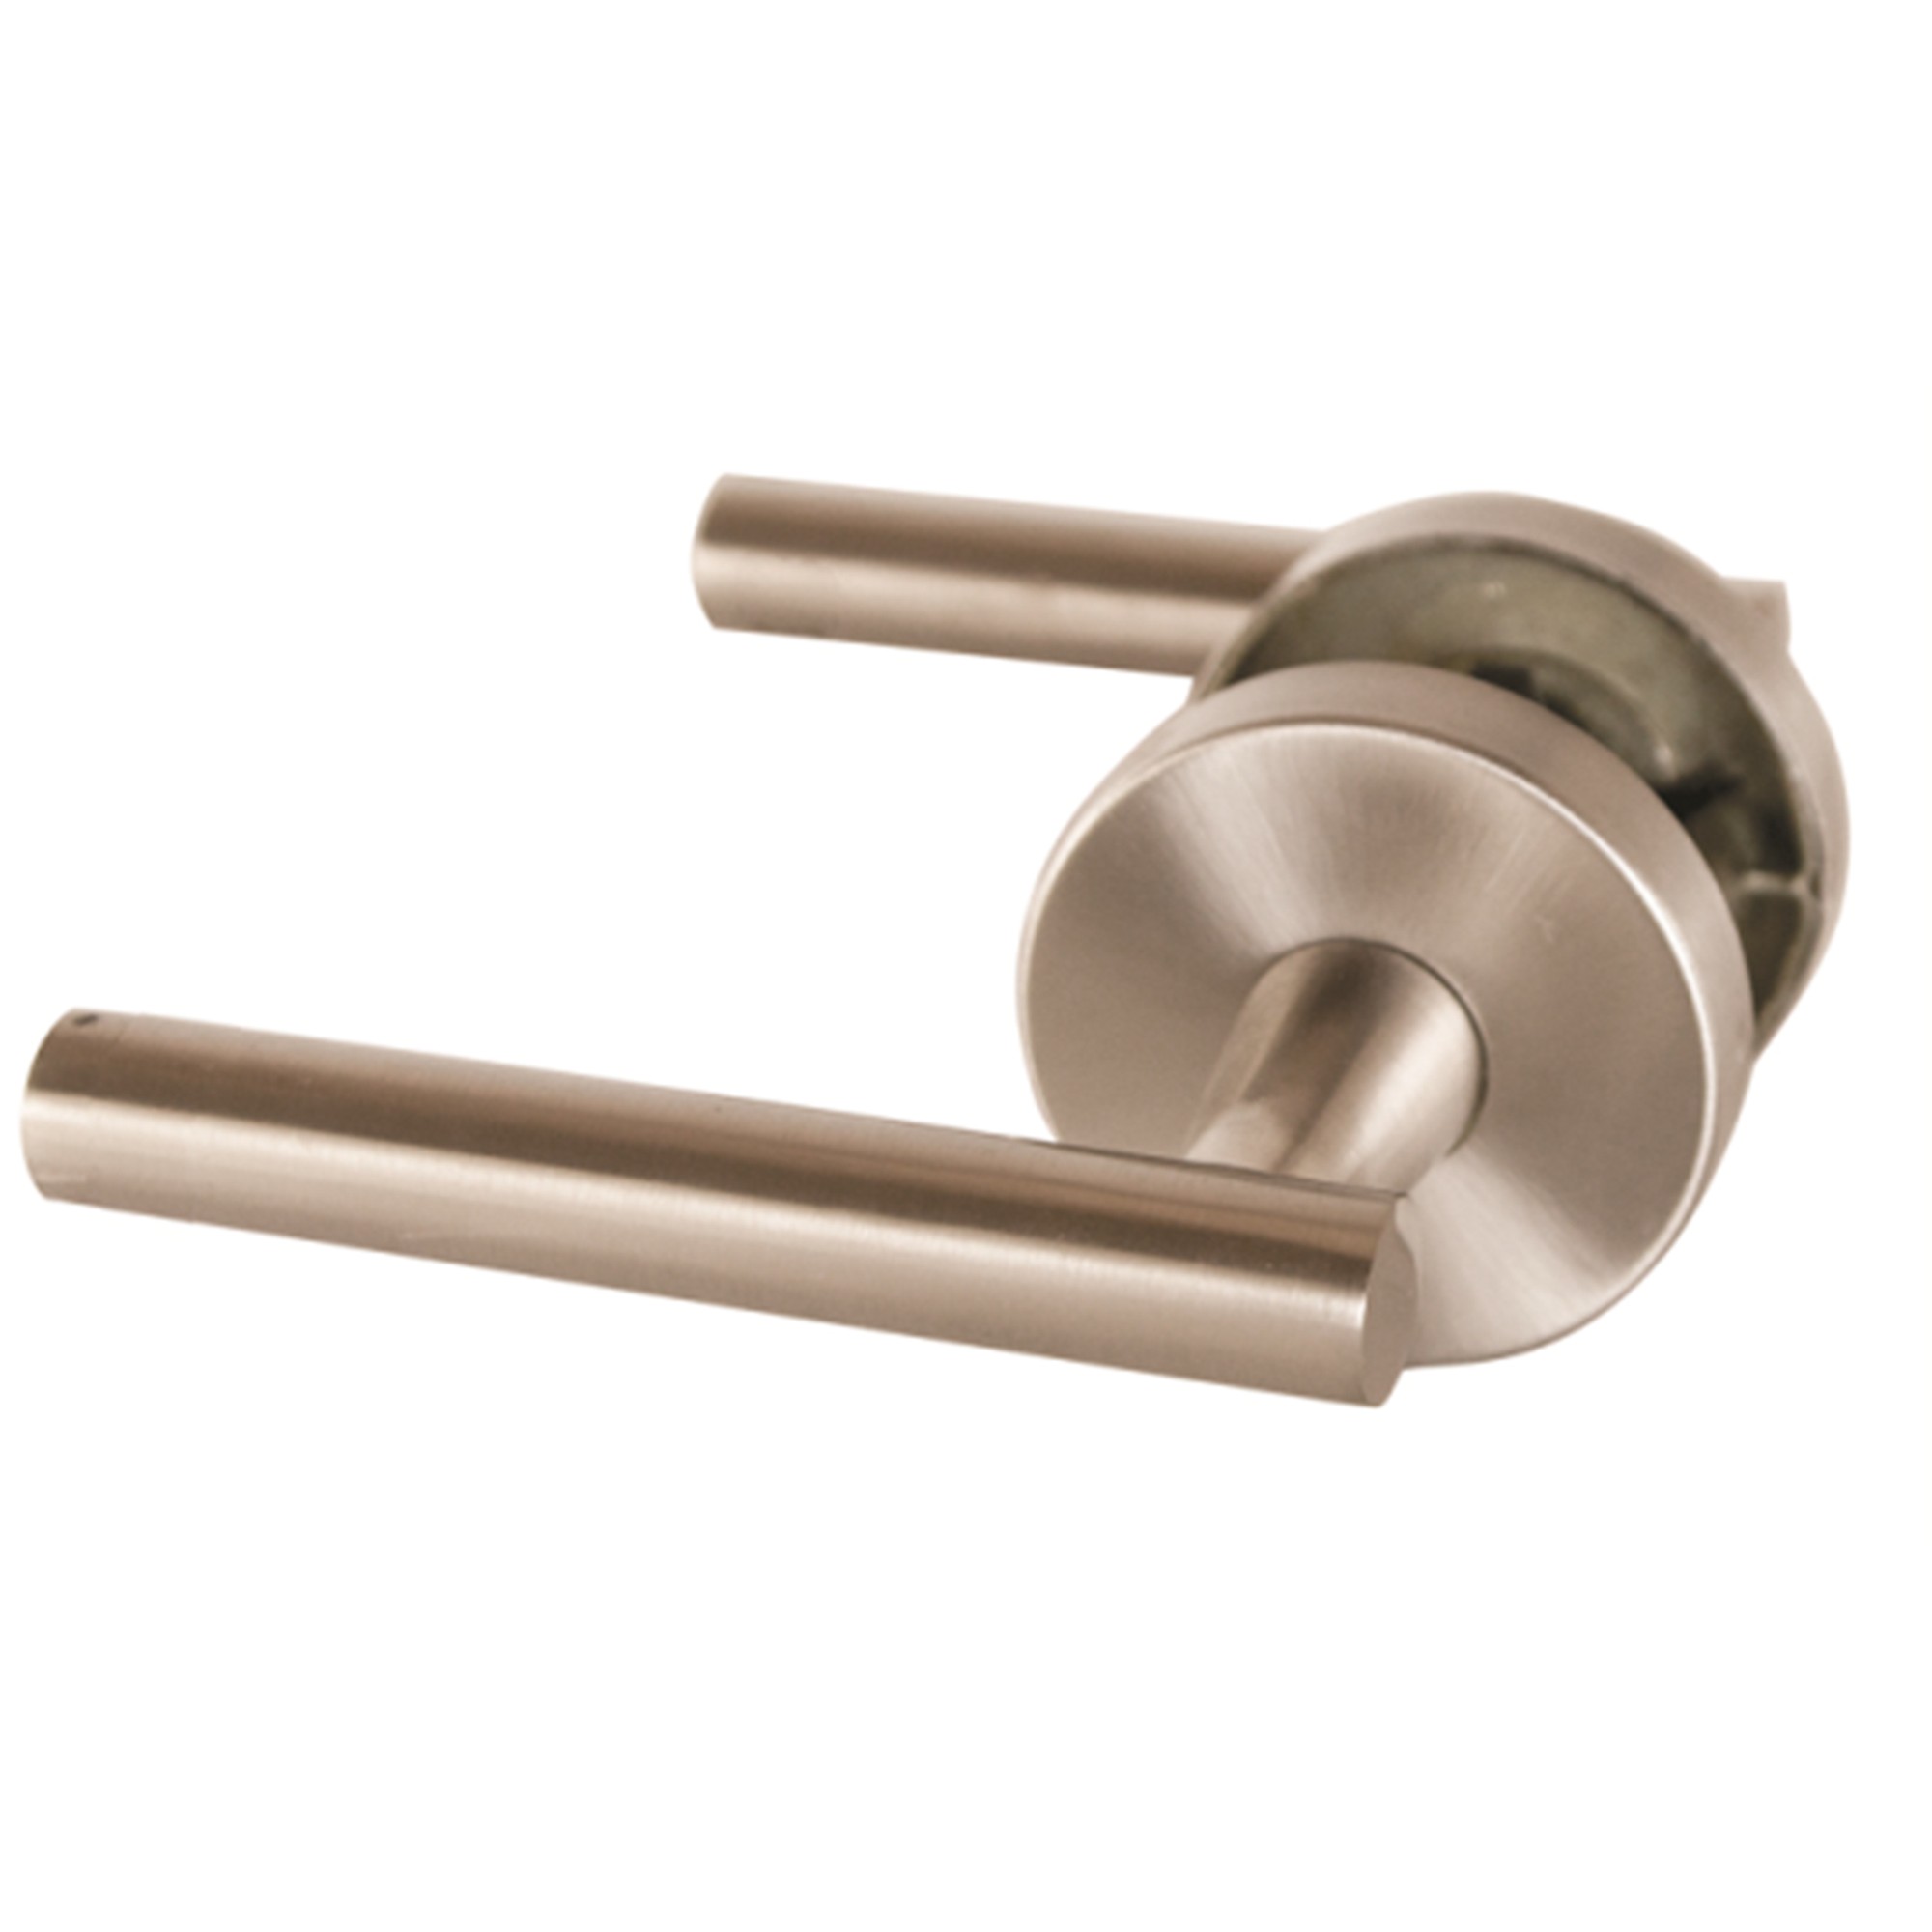 Design House 580951 Eastport Hall and Closet Door Lever, Reversible for Left or Right Handed Doors, Satin Nickel Finish